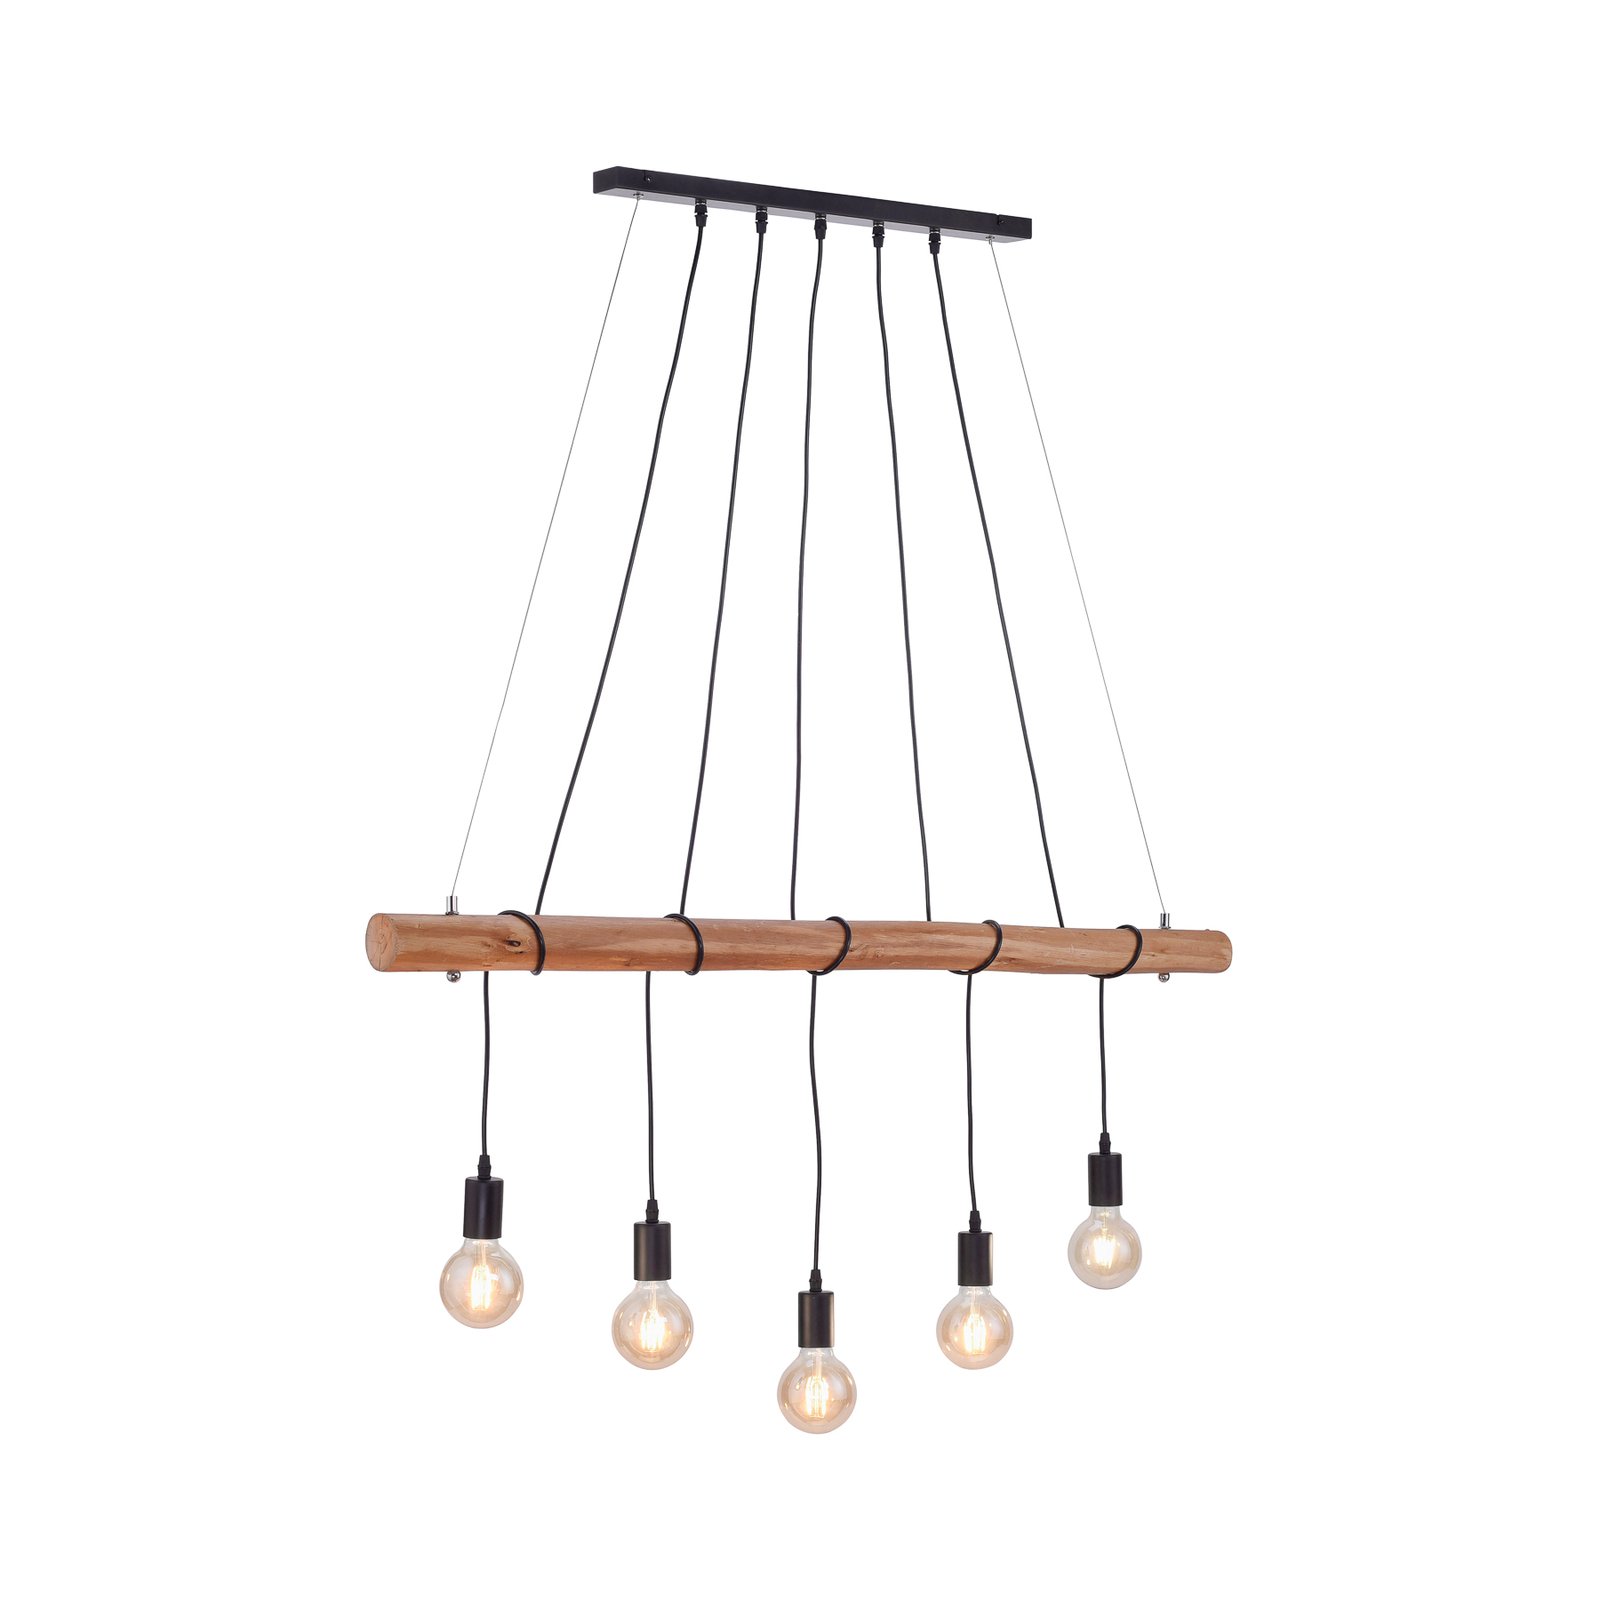 Damian pendant light with wooden beam and 5 sockets